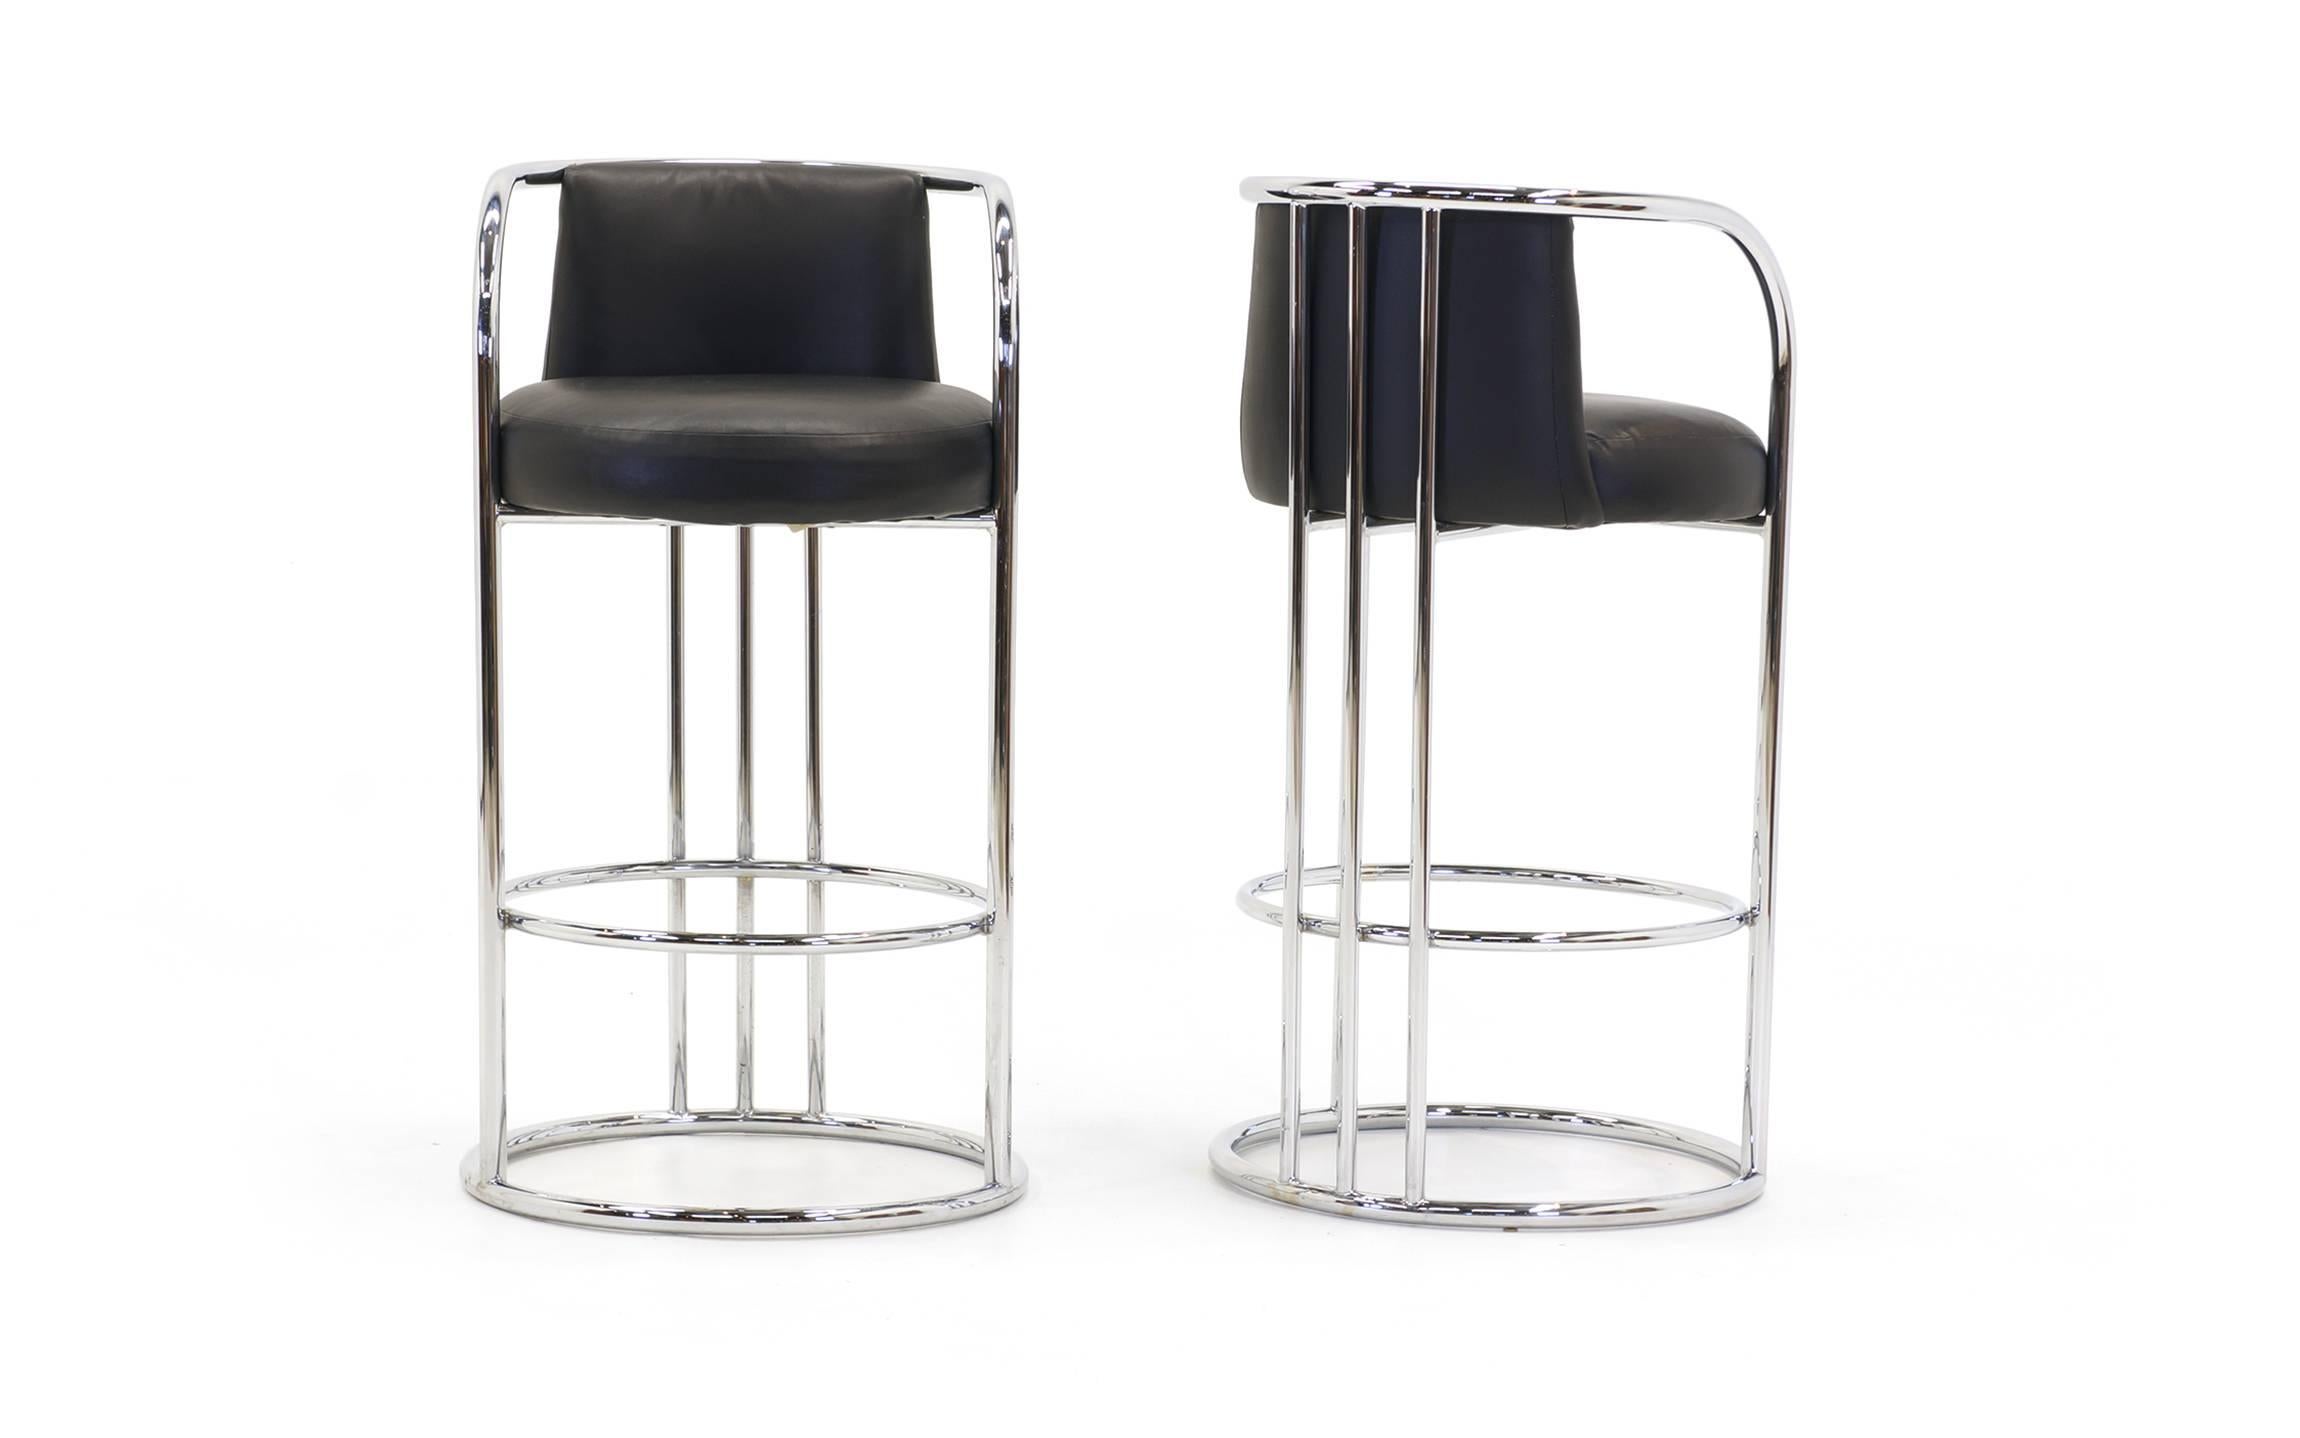 Late 20th Century Milo Baughman for Thayer Coggin Chrome and Black Bar Stools, Five Total, Signed